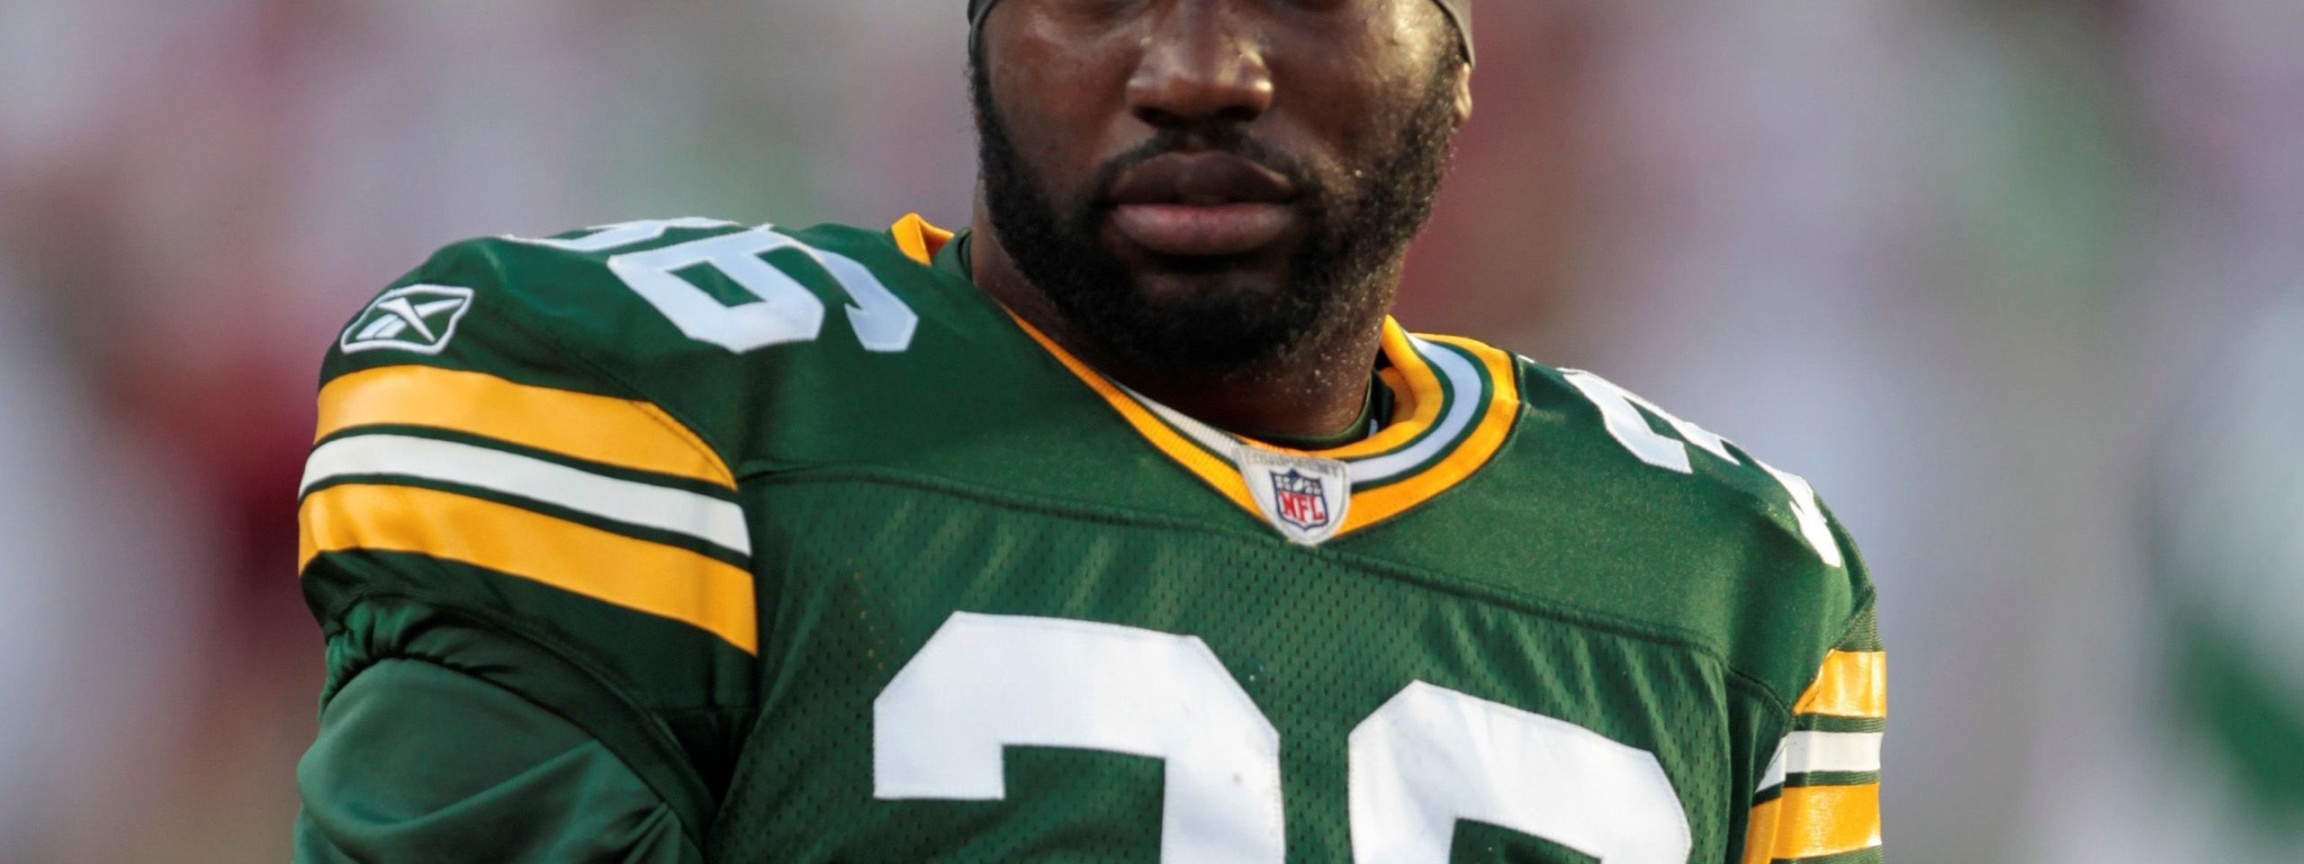 Green Bay Packers American Football Nick Collins